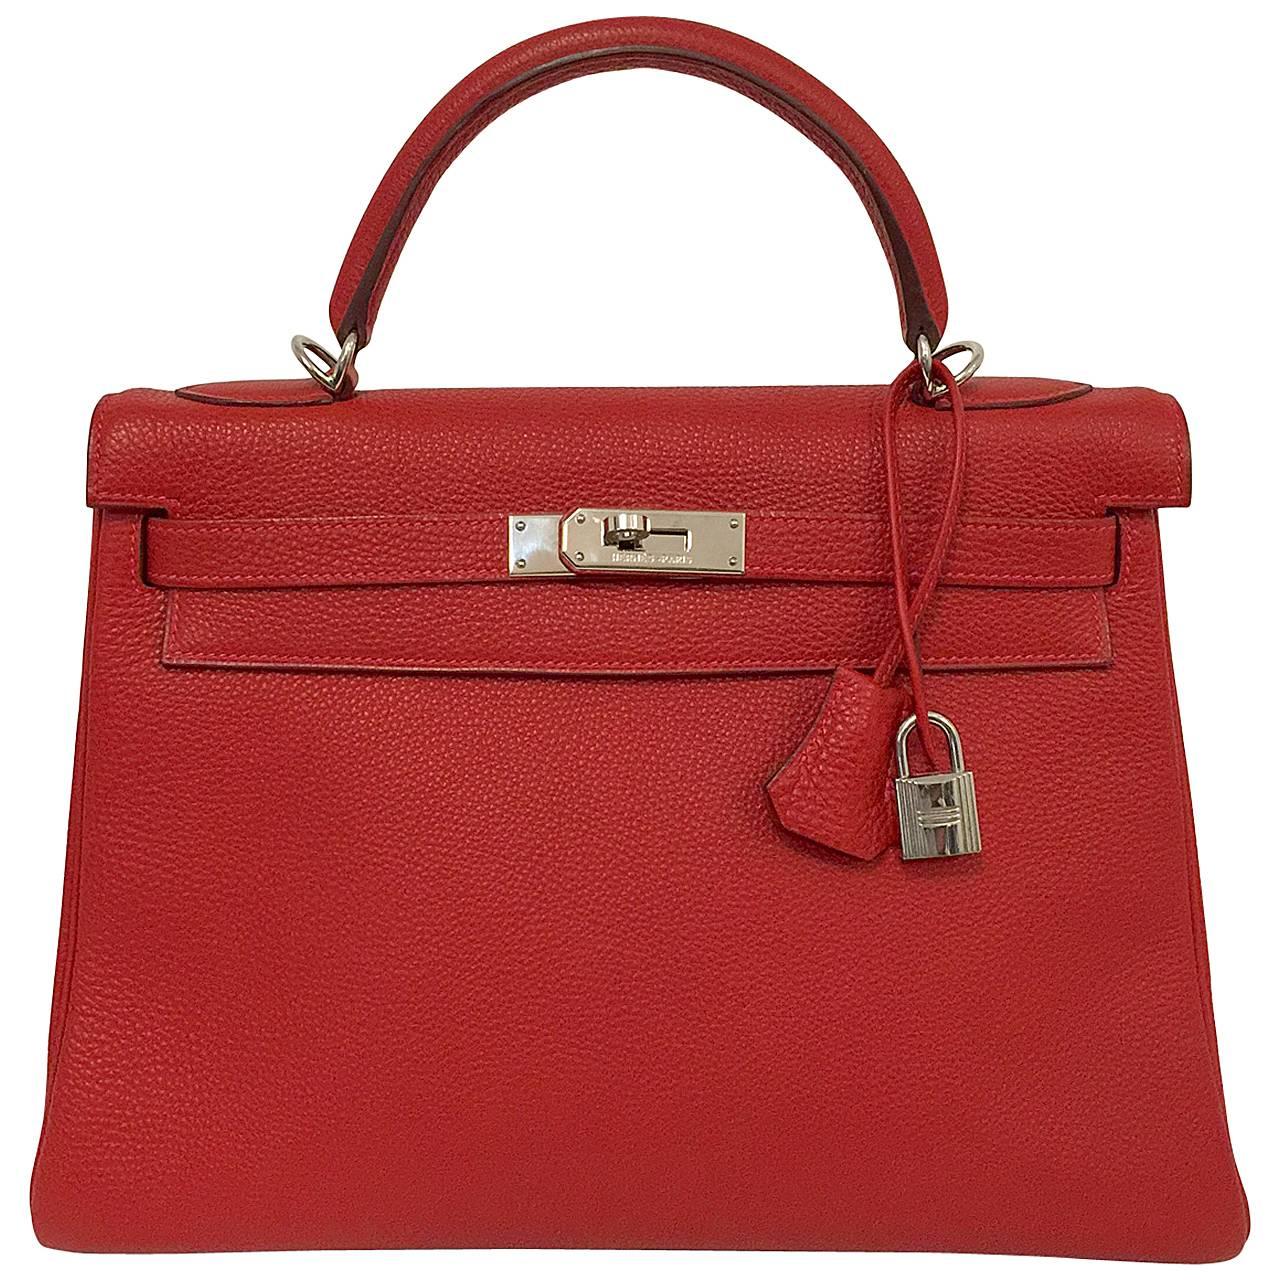 2004 Hermes Kelly 32 Vermillion Togo PHW Excellent Condition